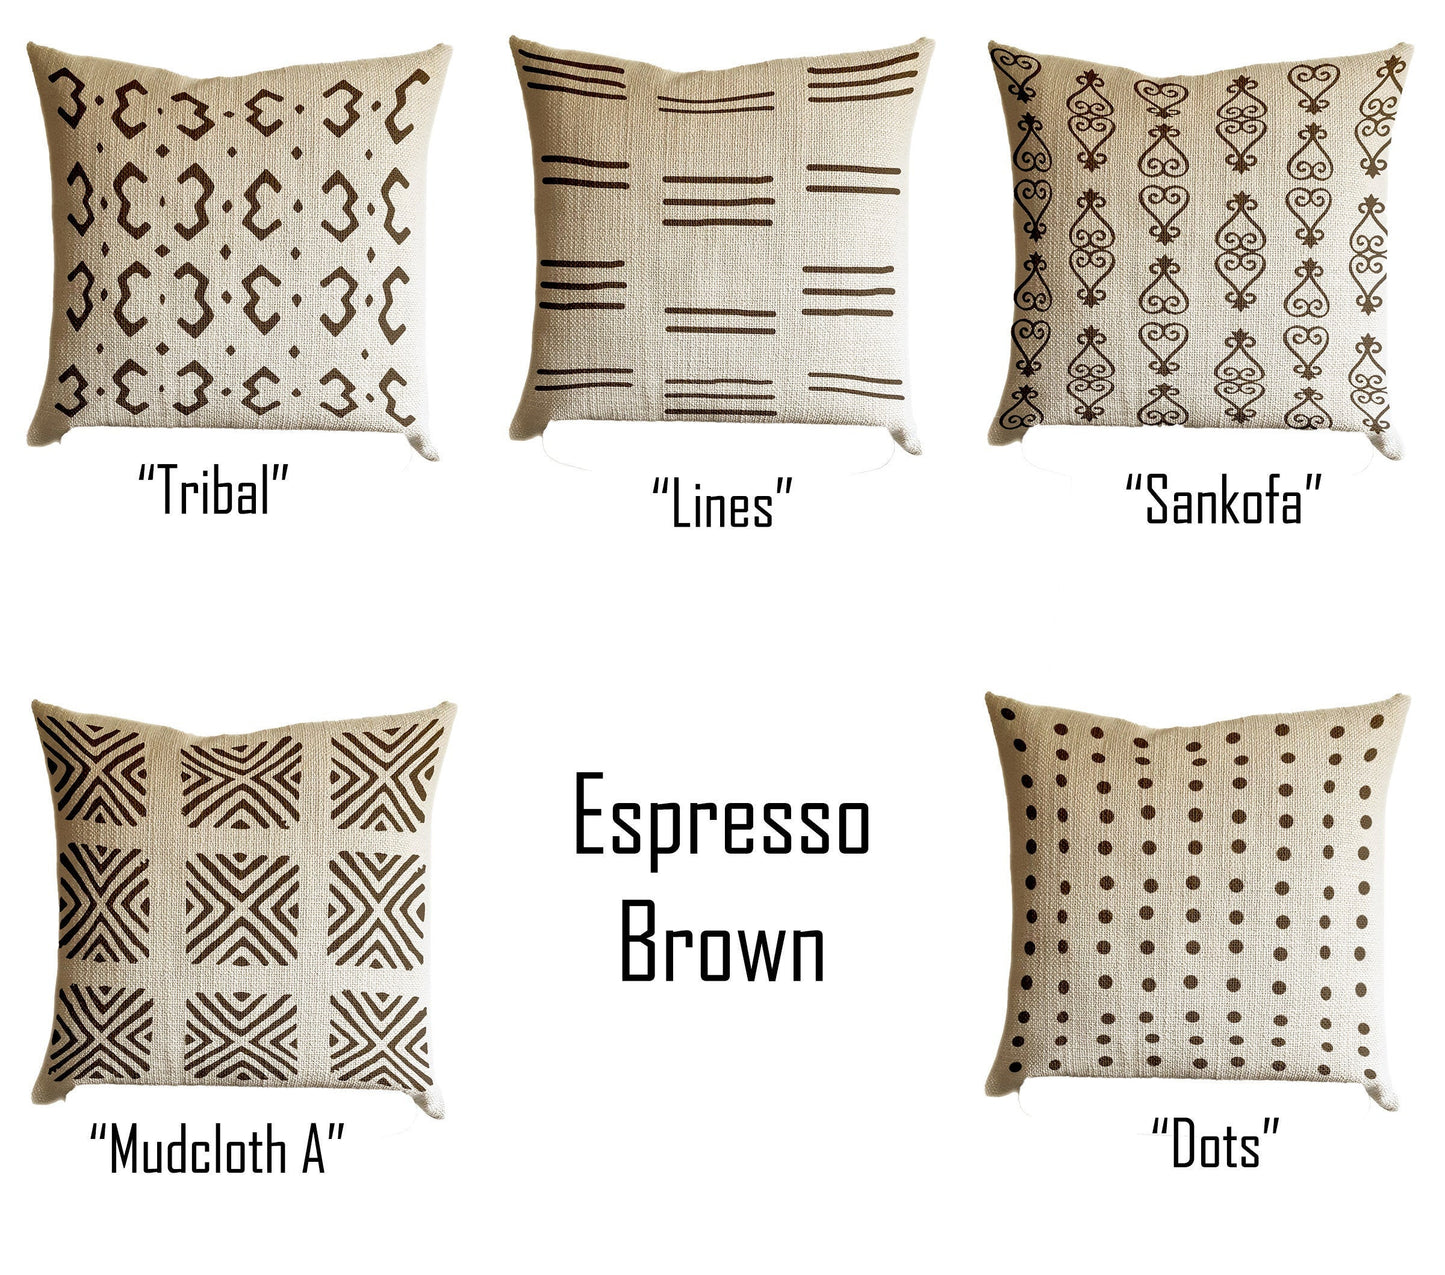 Espresso Dark Brown Pillow Cover, Tribal Urban Ethnic Square 18x18 in Natural Oatmeal Color Textured Woven Fabric in Modern Boho Home Decor